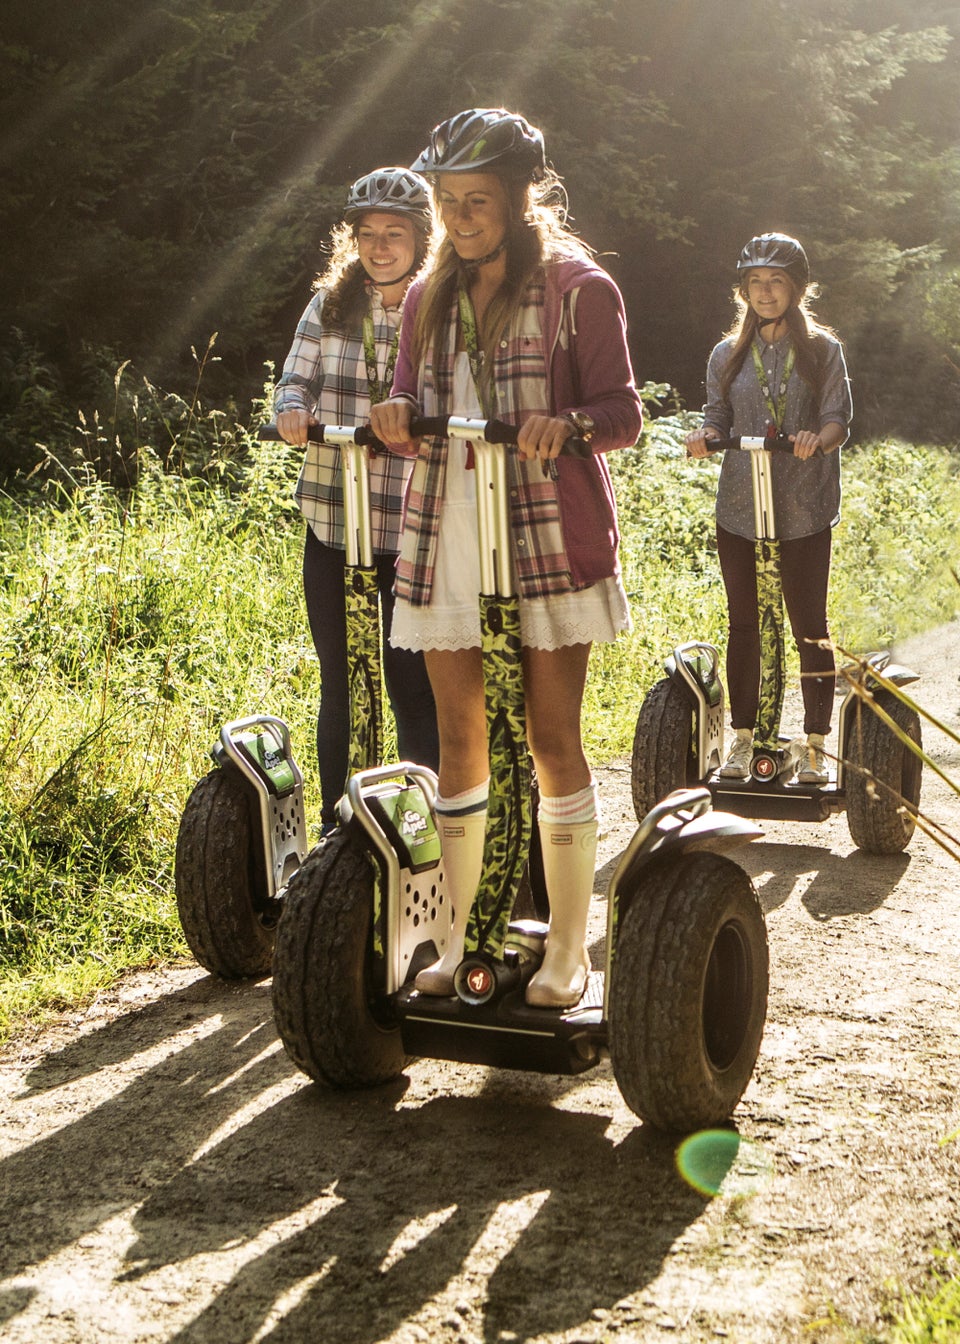 Virgin Experience Days Forest Segway Adventure for Two with Go Ape